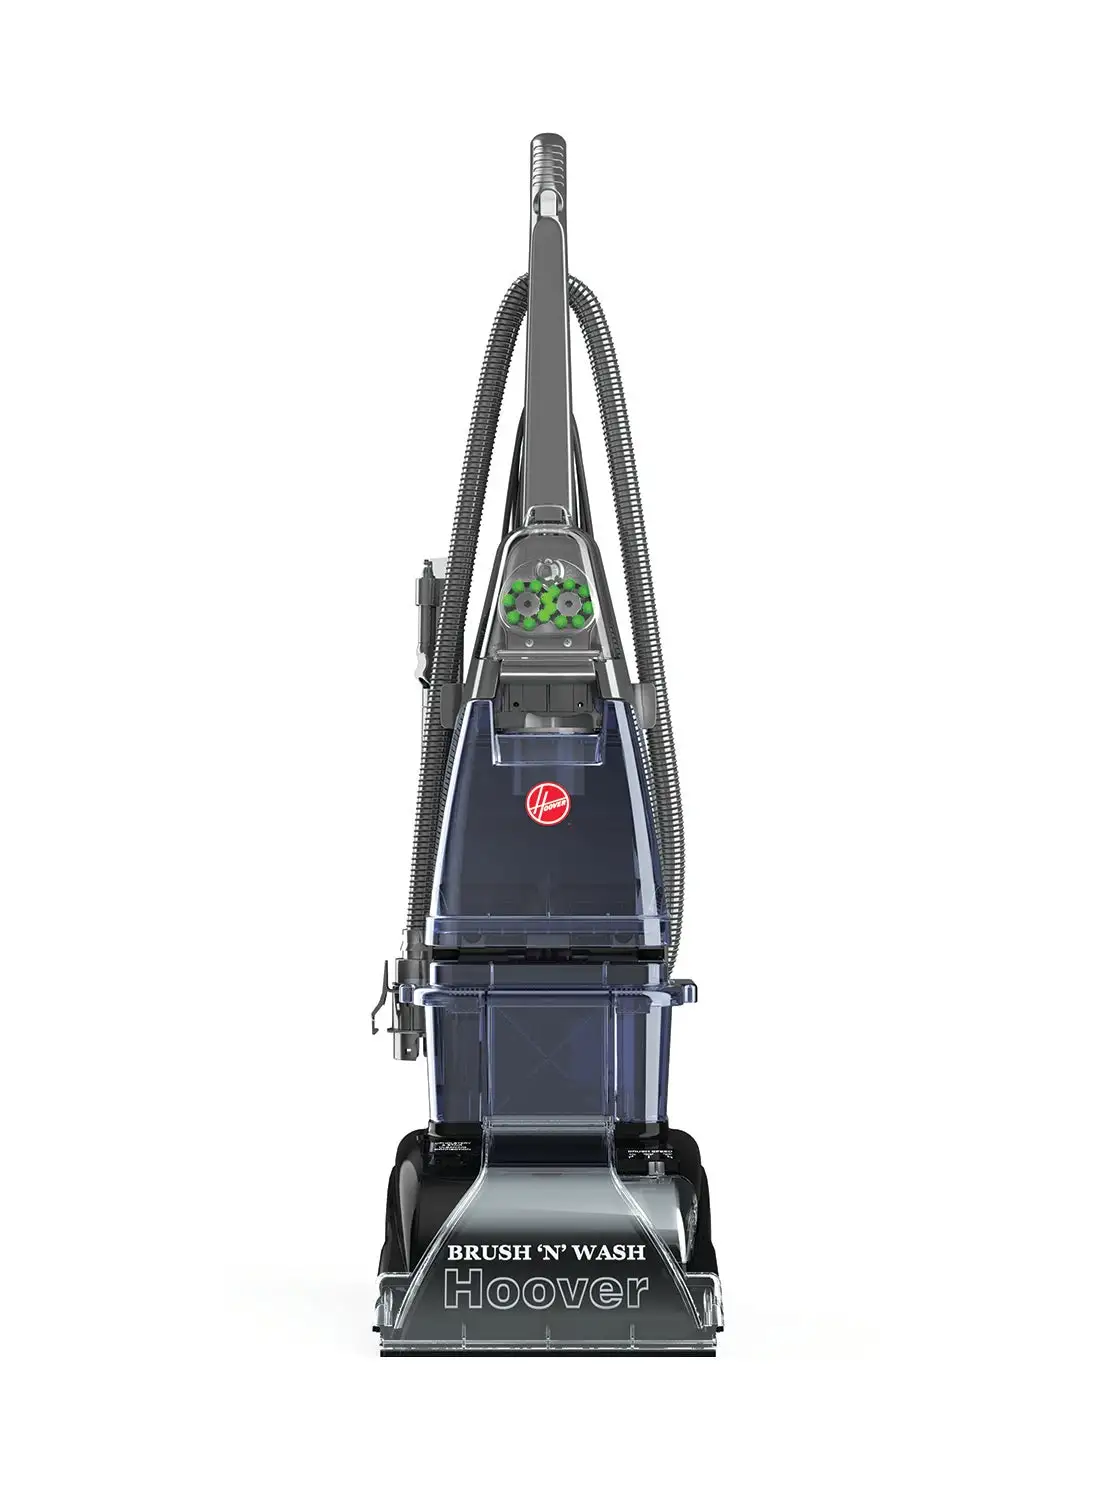 HOOVER Brush & Wash 2 in 1 Carpet Washer & Hard Floor Cleaner, Spin Scrub Brush And Twin Tank Technology For Home, Office & Majlis Use, 1 Year Warranty - 131355 4 L 1400 W F5916901 Grey